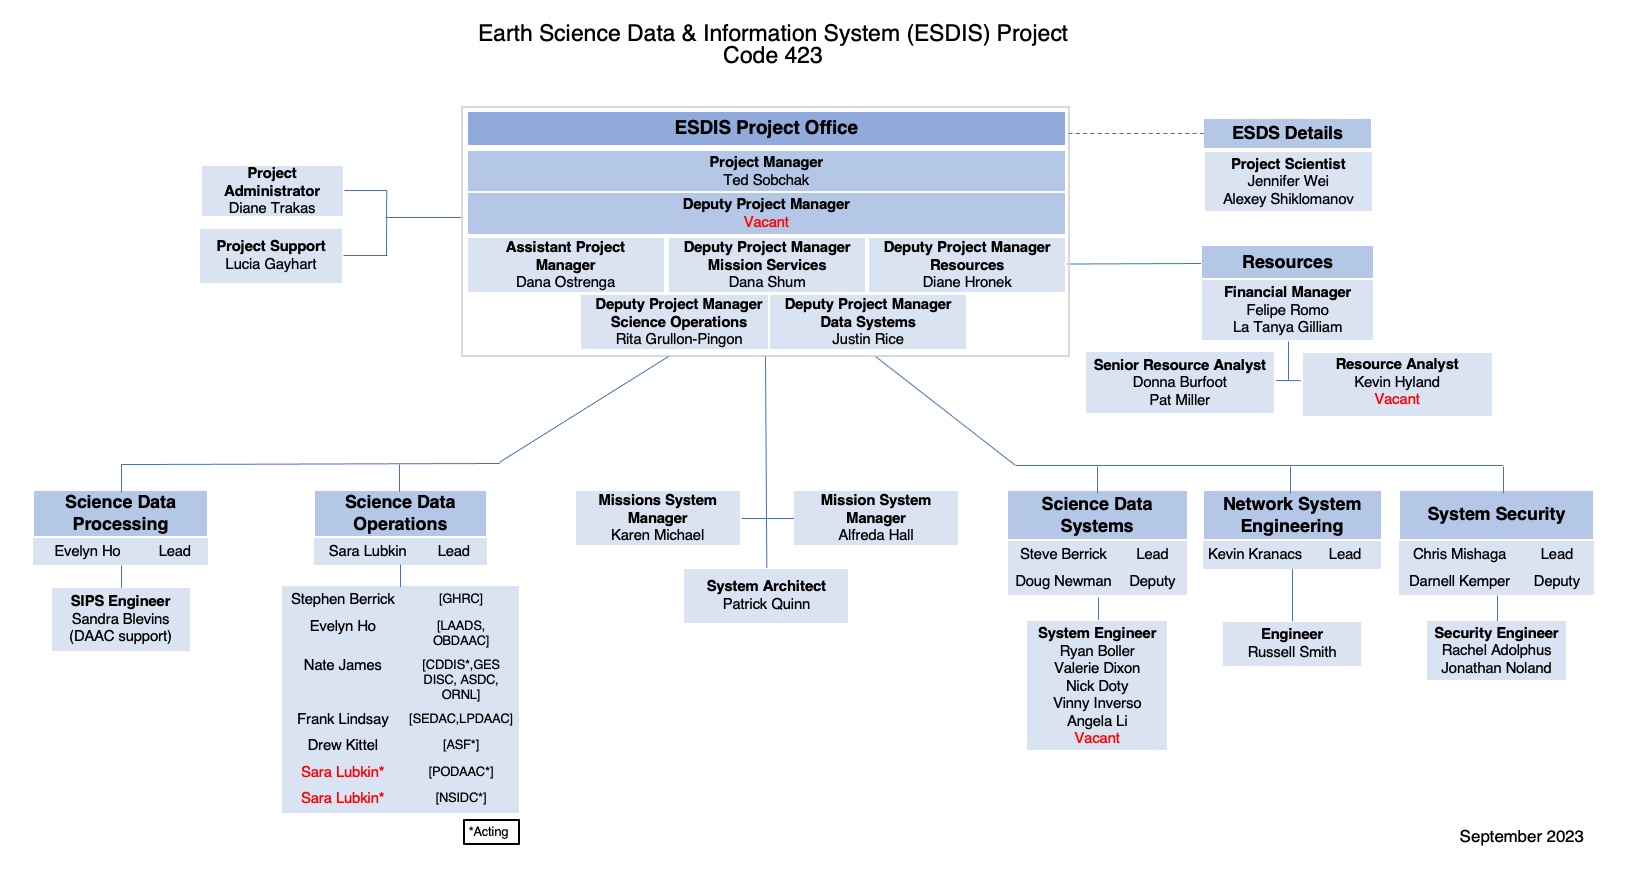 Earth Science Data and Information Systems (ESDIS) Project Organization Chart September 2023